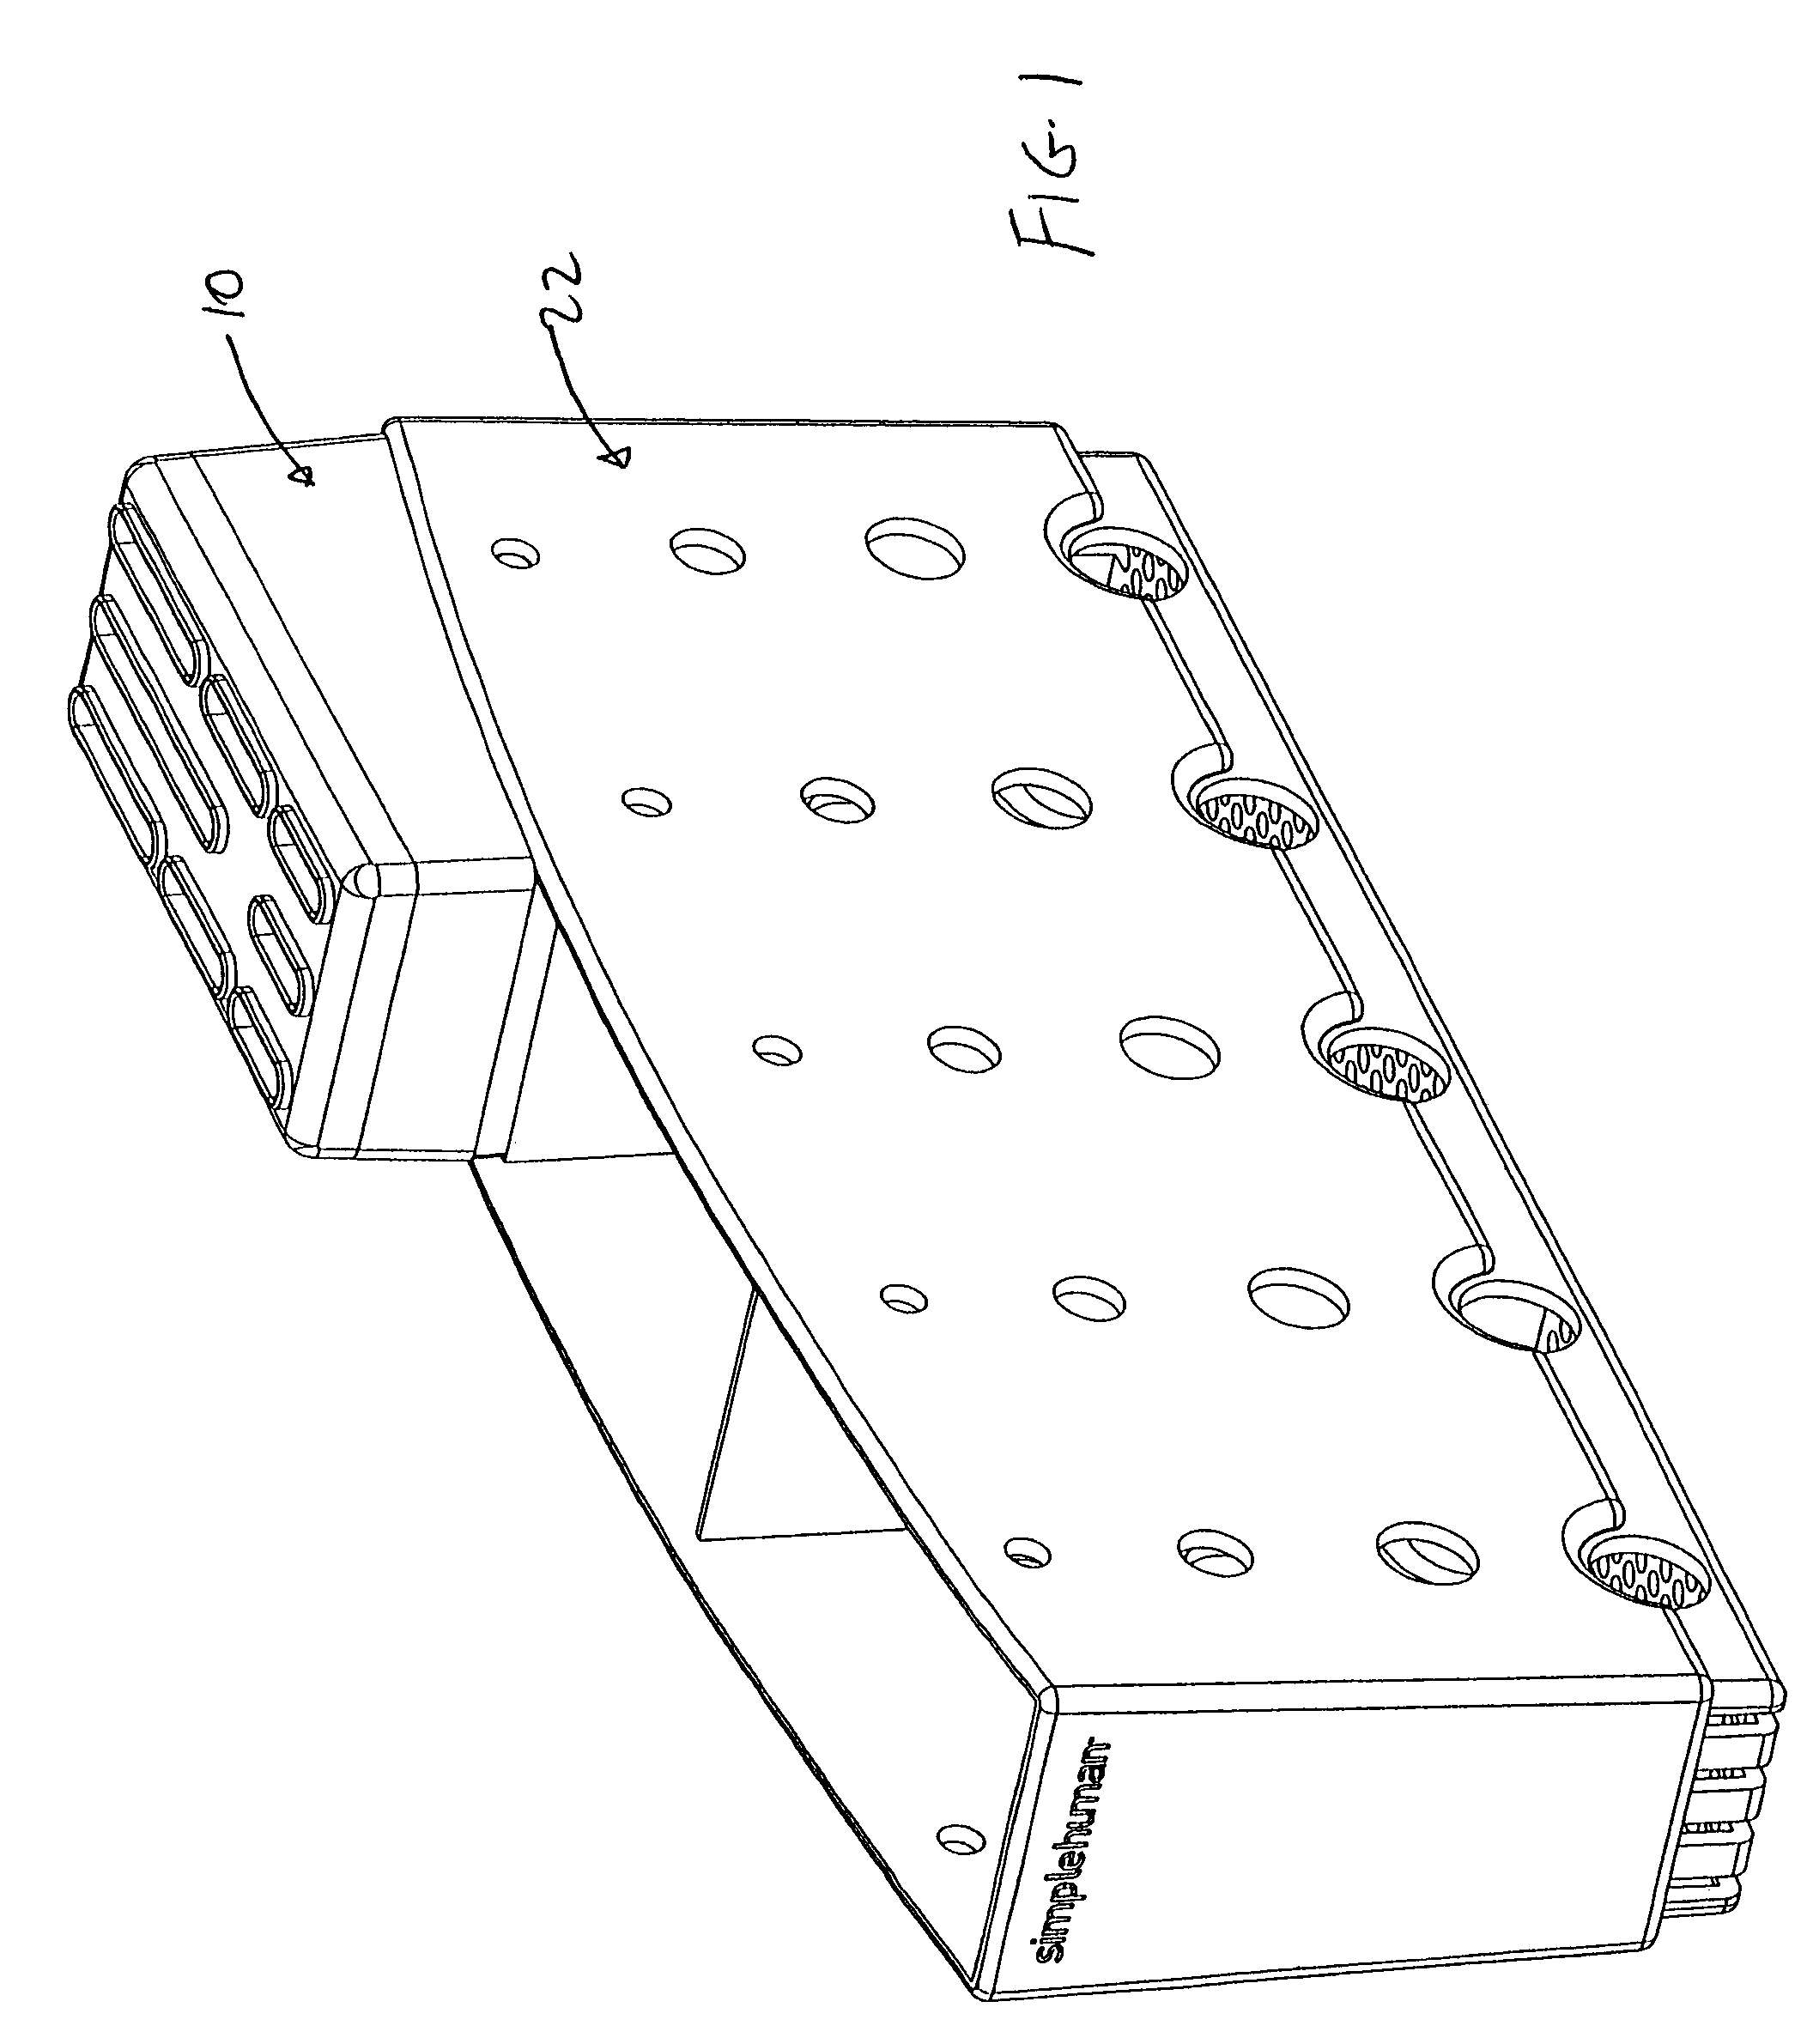 Retainer block for use with dish rack